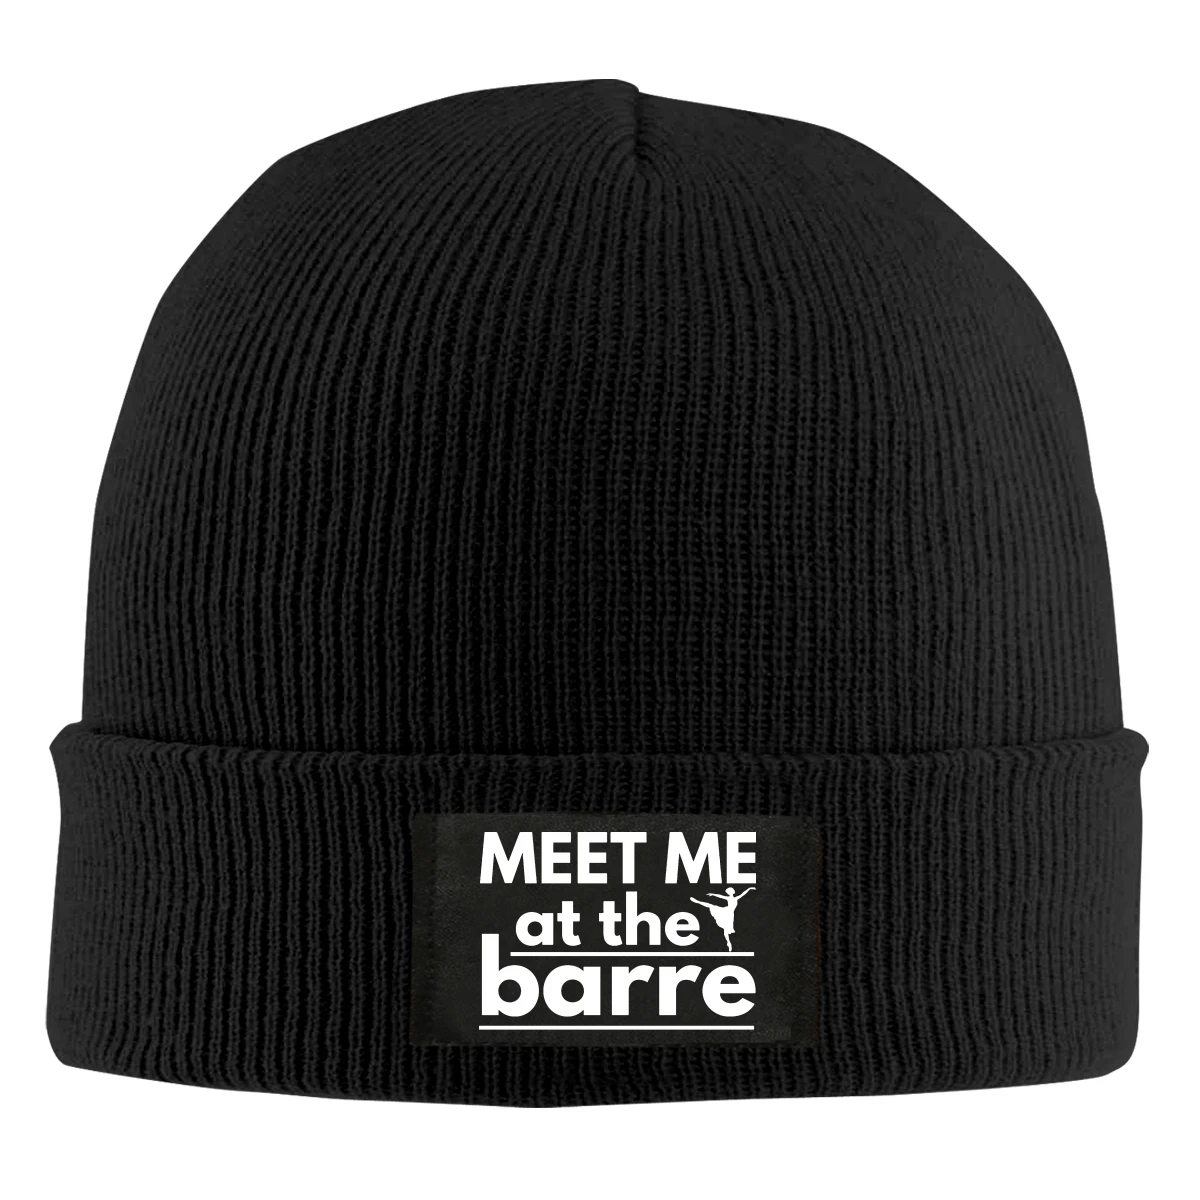 

Meet Me At The Barre Beanie Hats For Men Women With Designs Winter Slouchy Knit Skull Cap